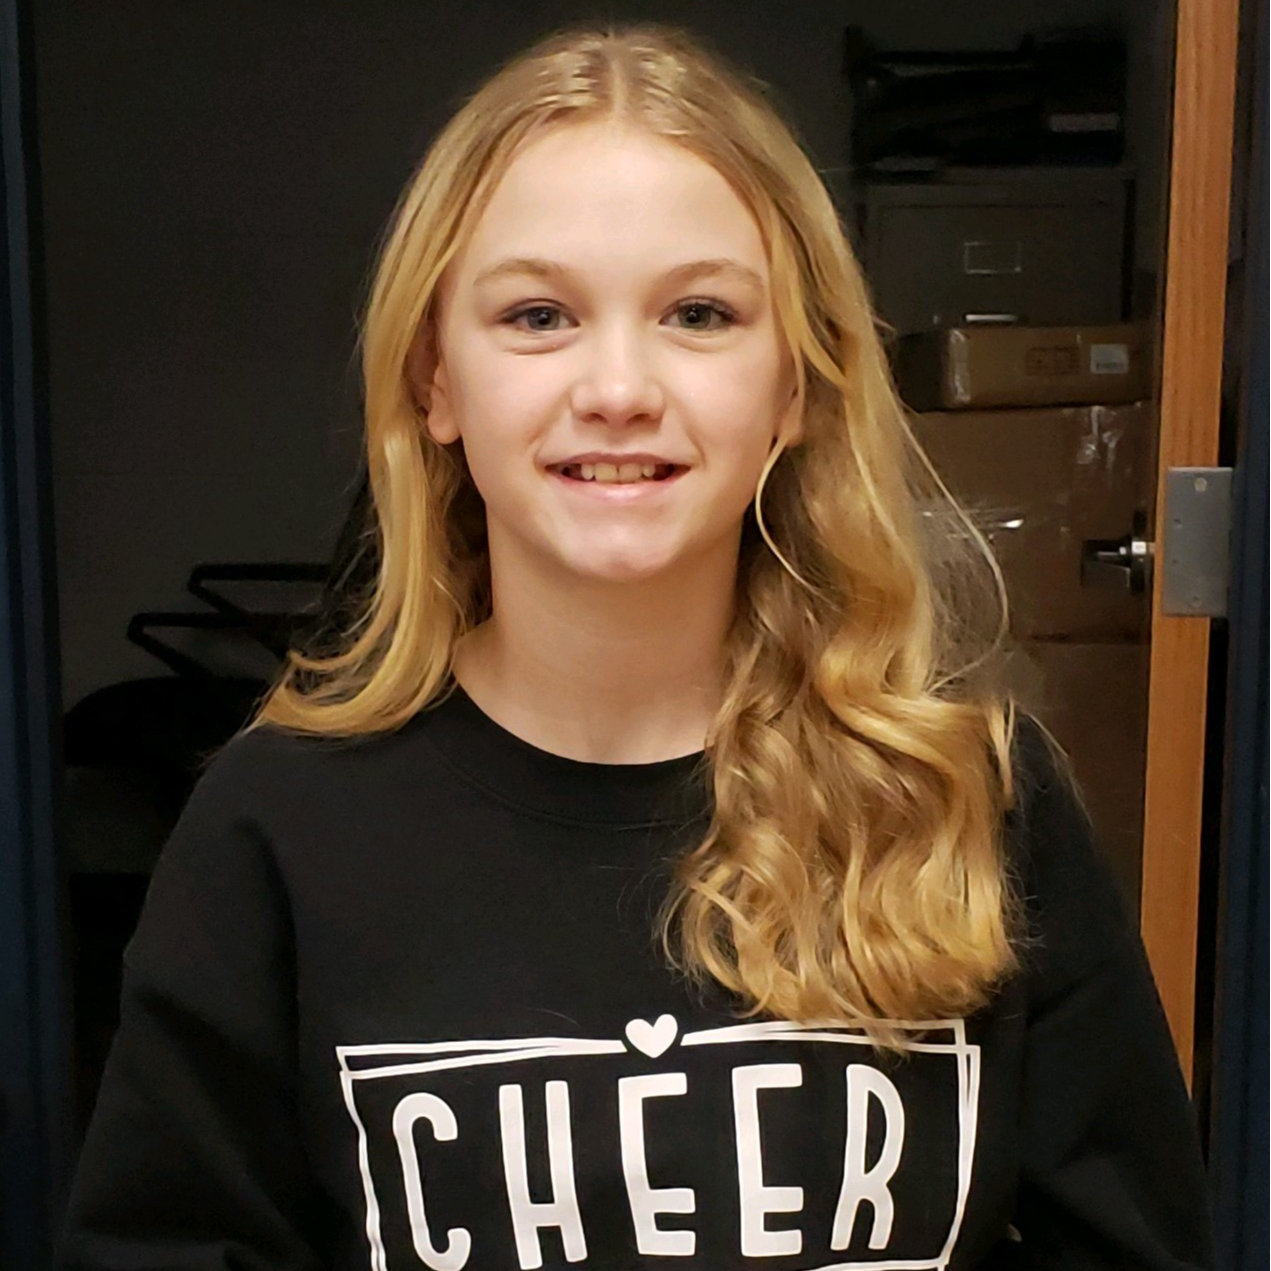 smiling girl with long blonde hair wearing a black sweatshirt with the word "CHEER""